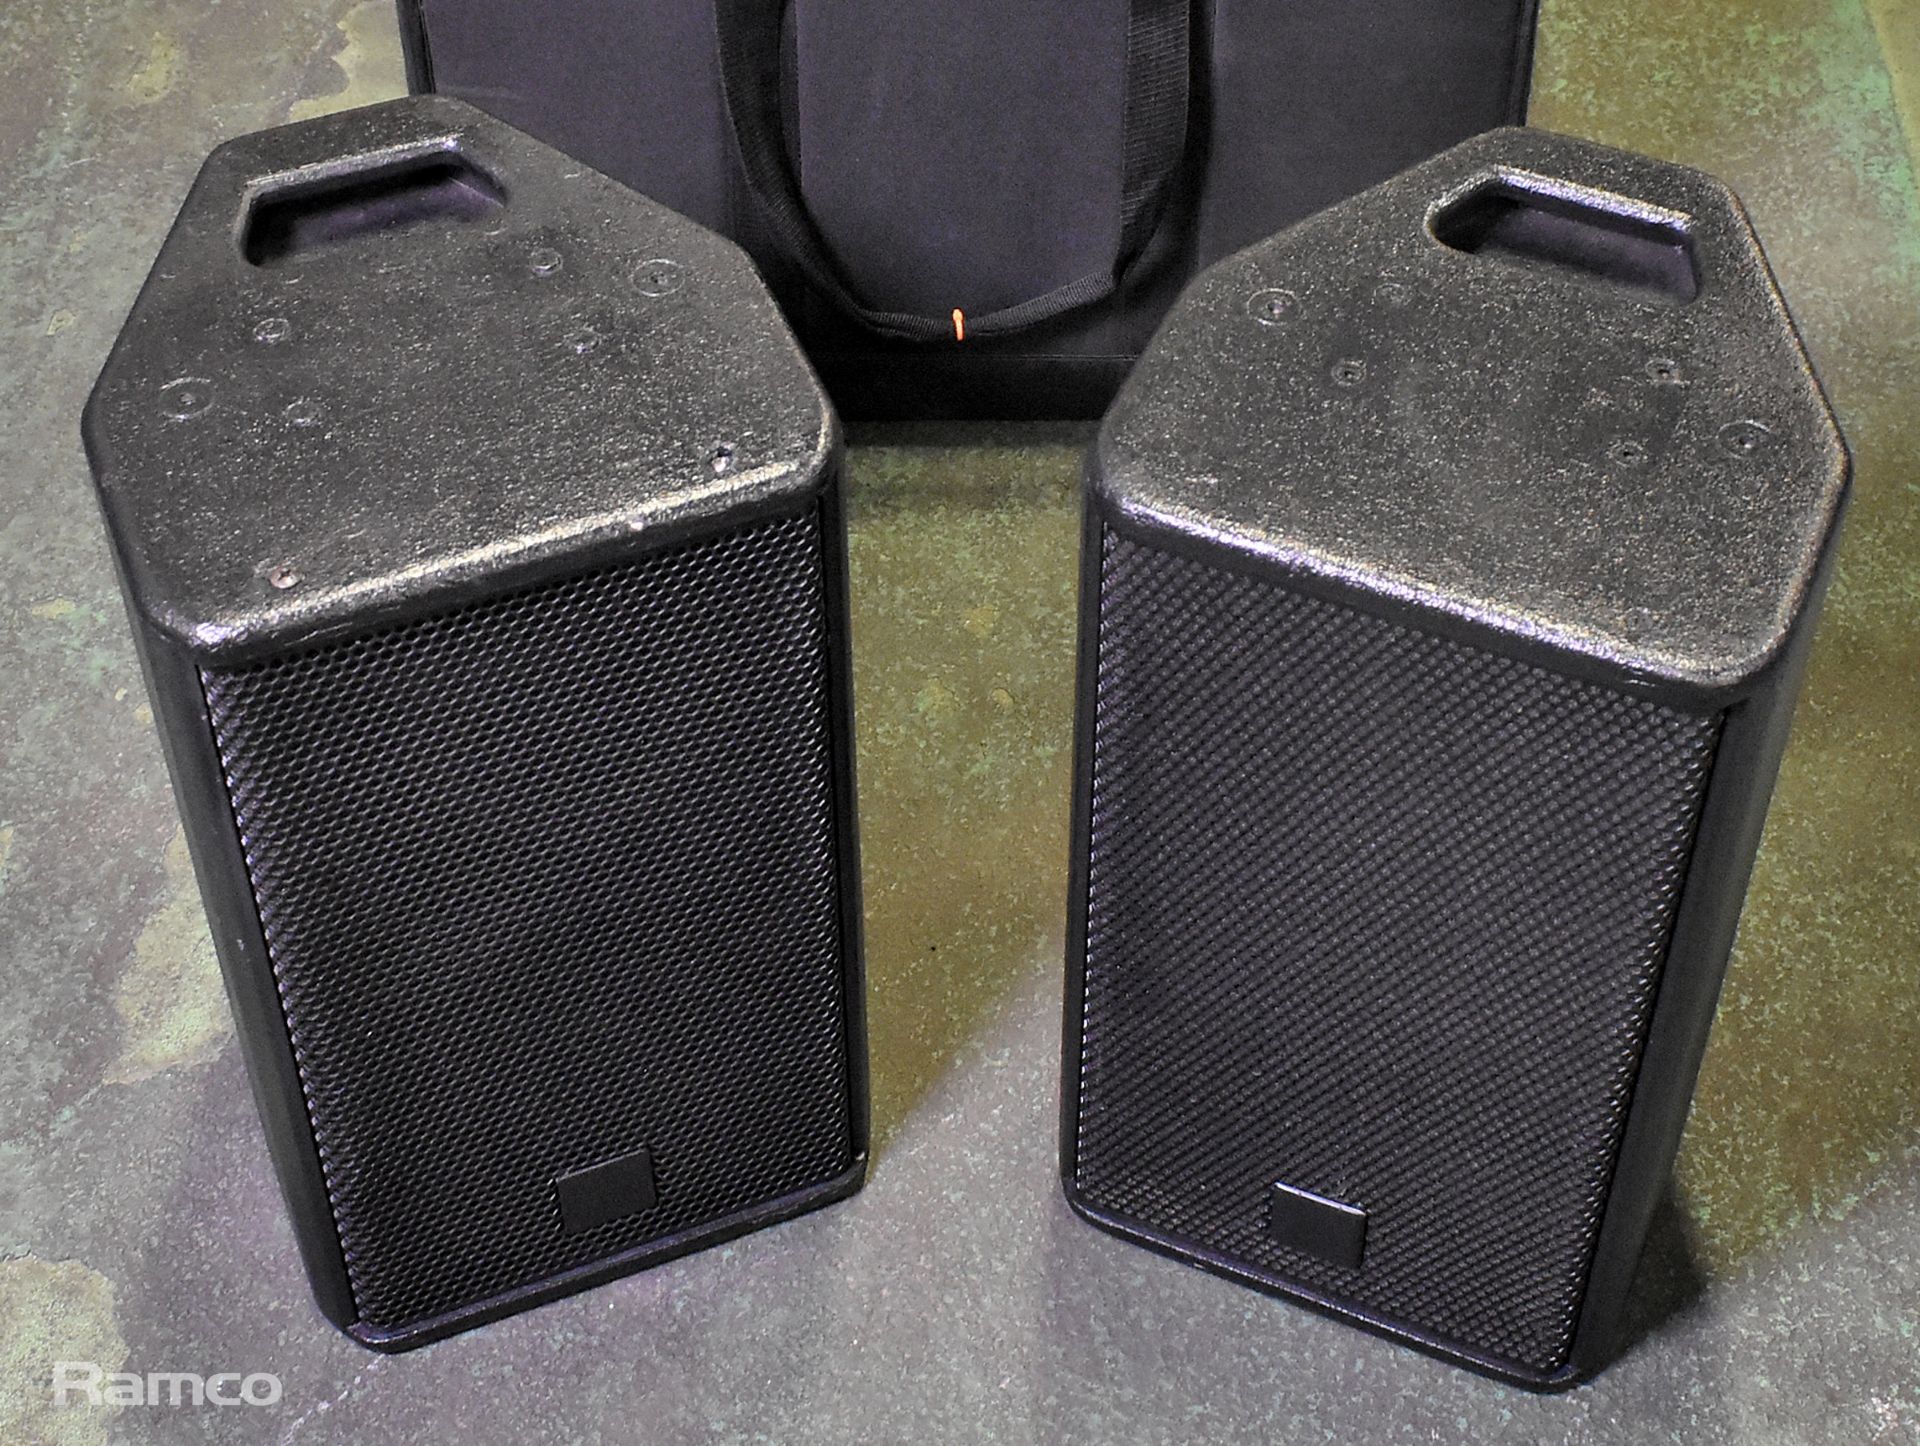 2x Logic LS8 loudspeakers - NL4 connection - recently painted with soft bag - Image 2 of 9